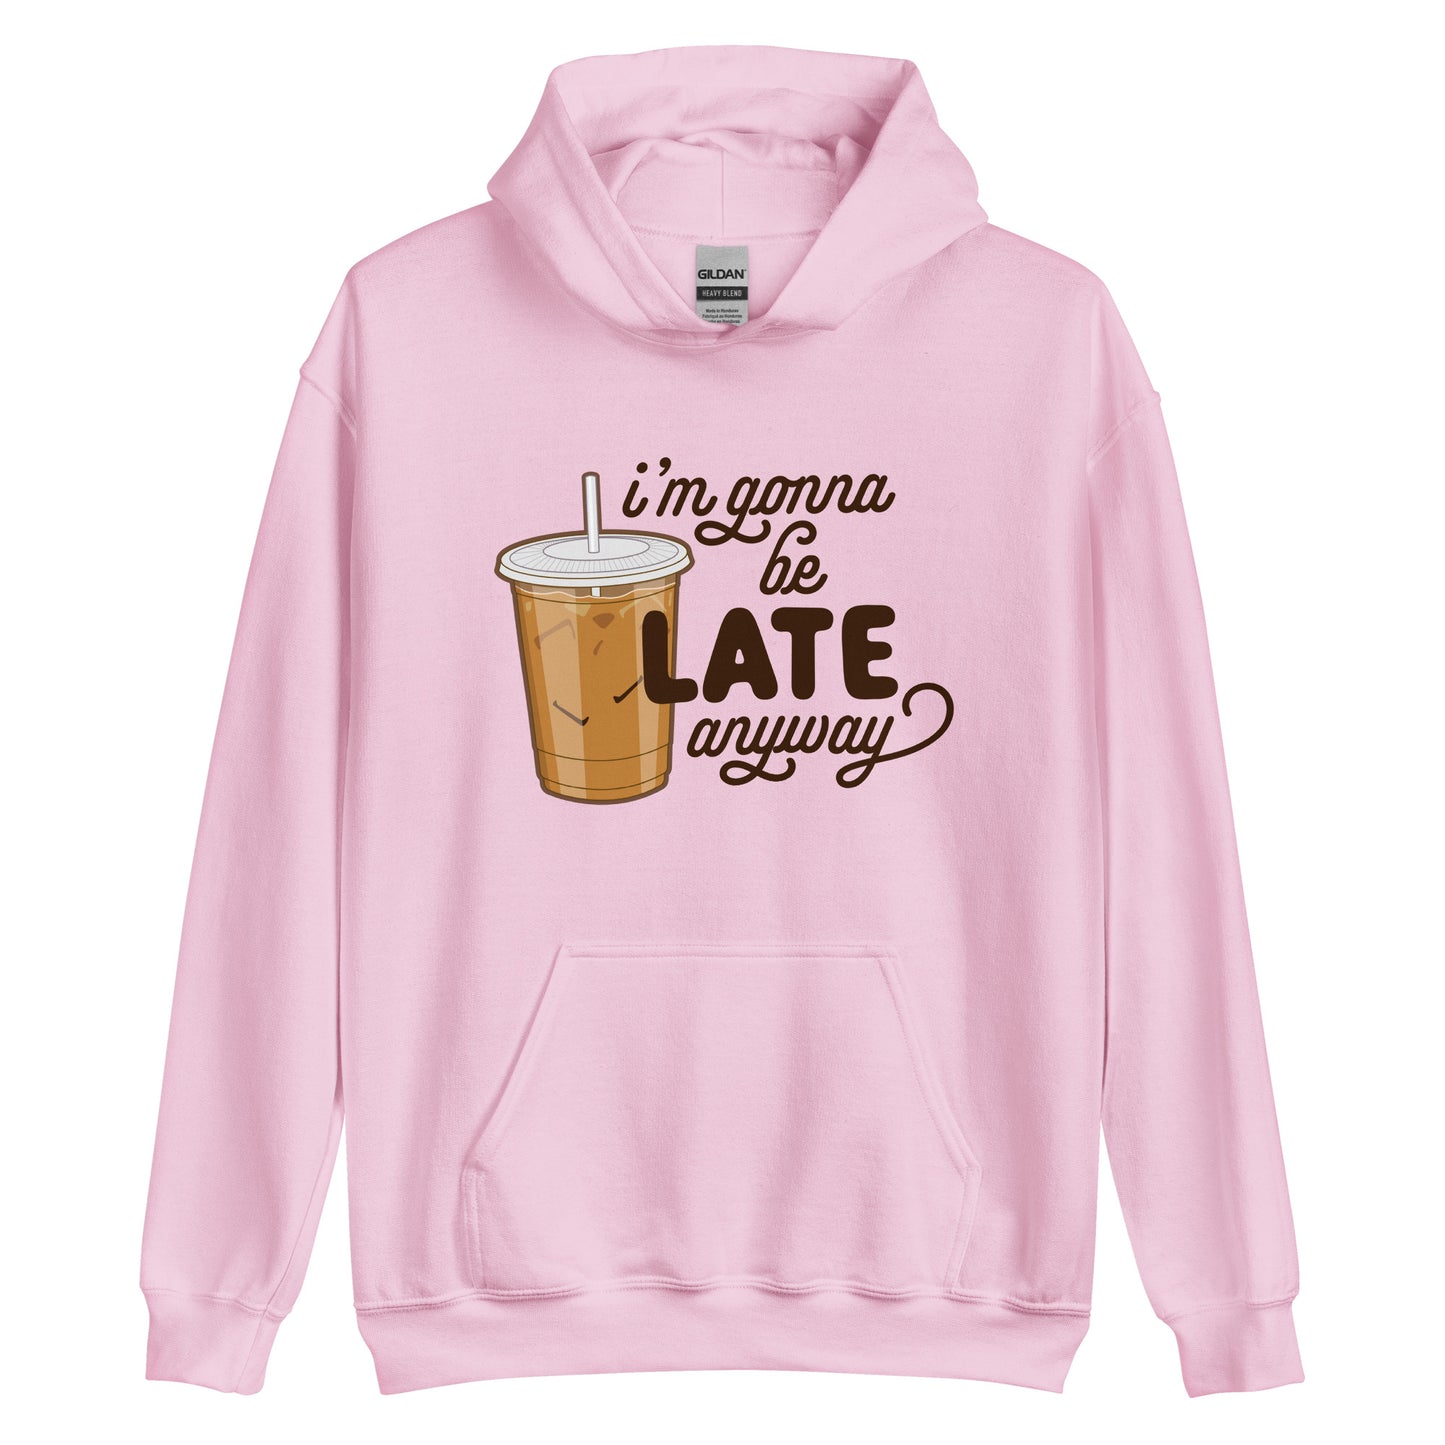 A light pink hooded sweatshirt featuring an illustration of iced coffee. Text next to the coffee reads "I'm gonna be LATE anyway".